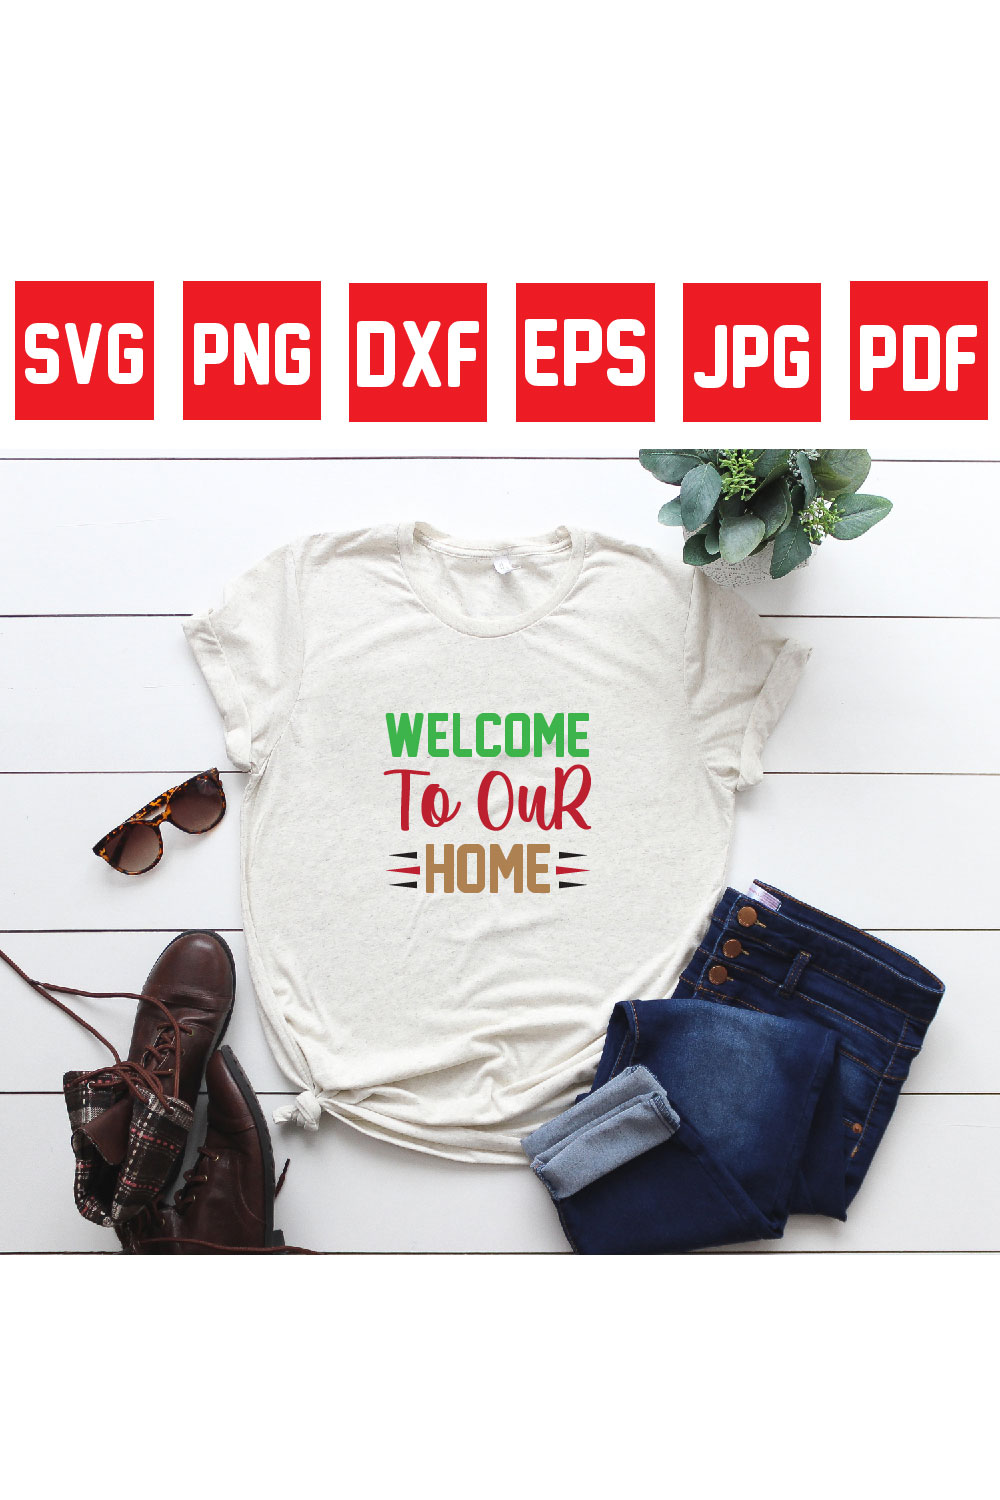 welcome to our home pinterest preview image.